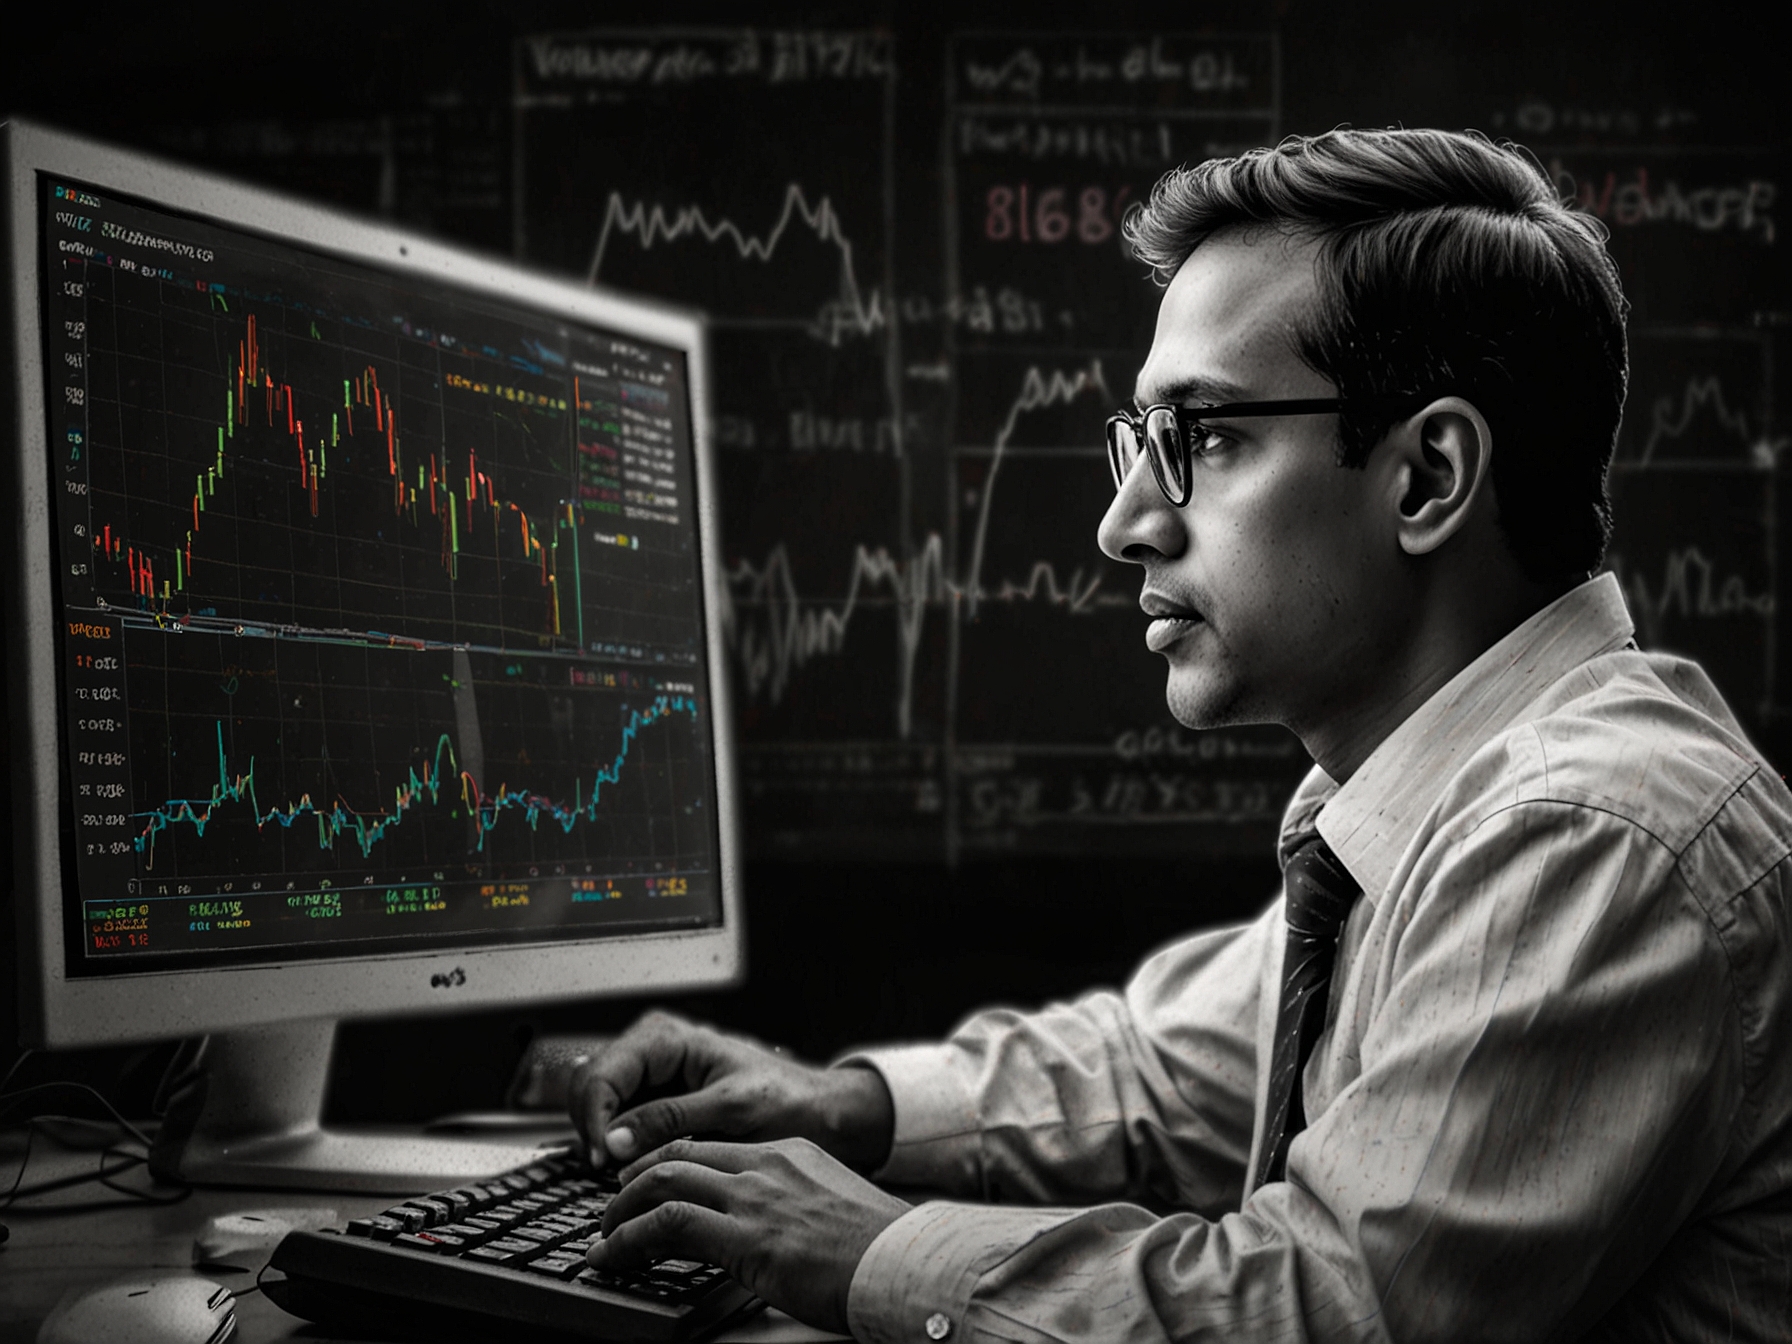 Rajesh Palviya of Axis Securities analyzing market data on a computer, highlighting the research and strategic basis behind stock recommendations.